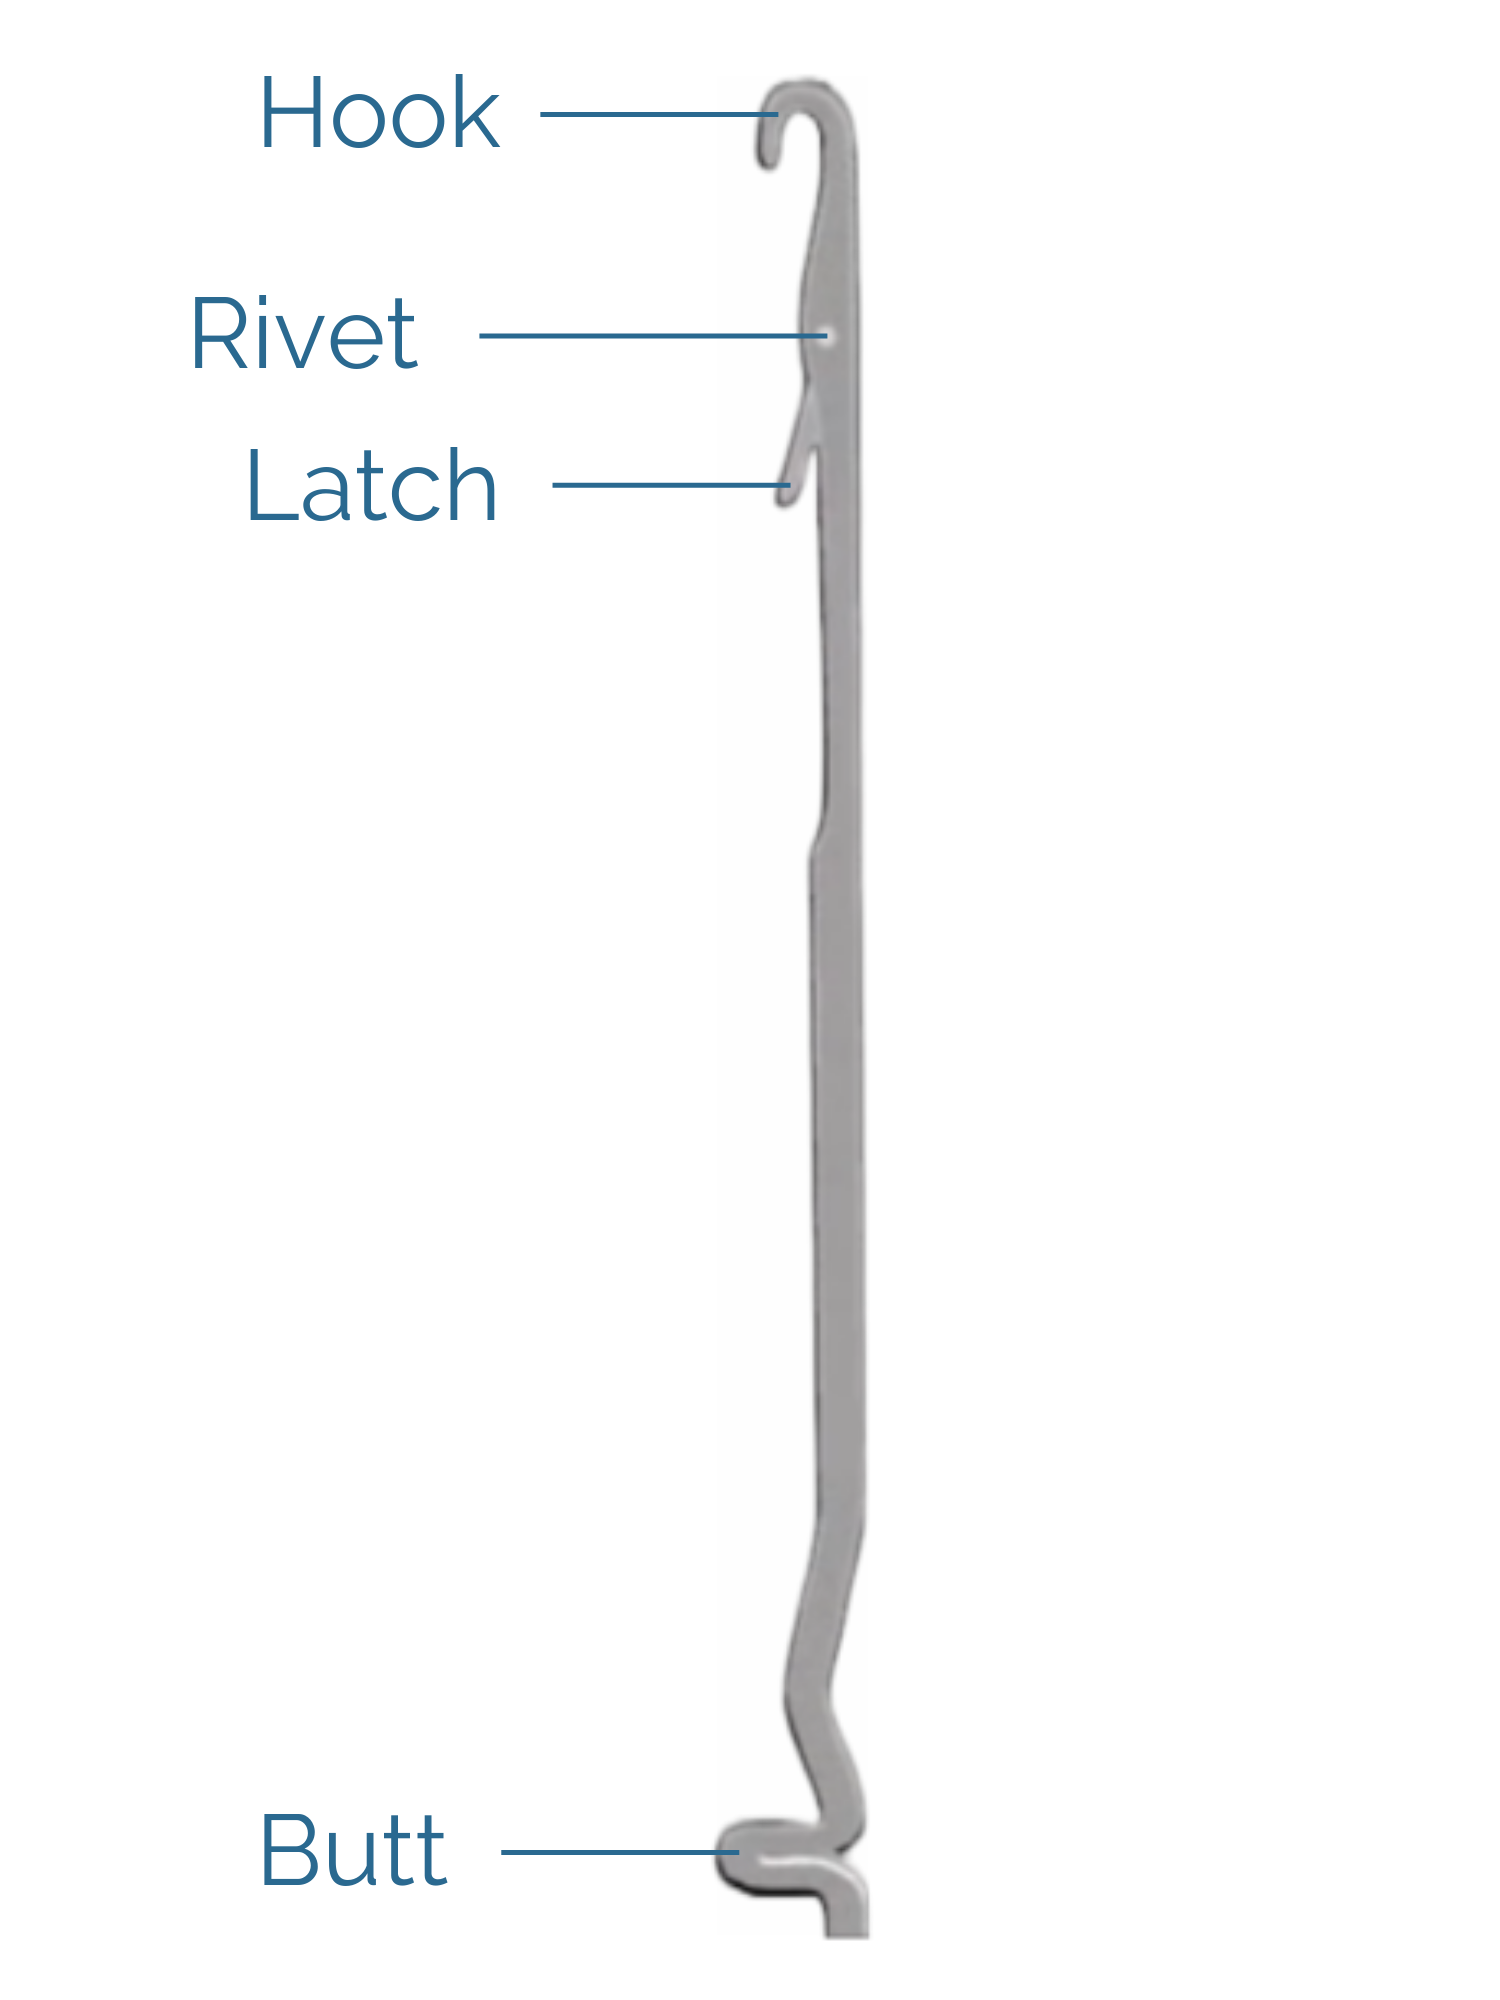 Latched Needle Components